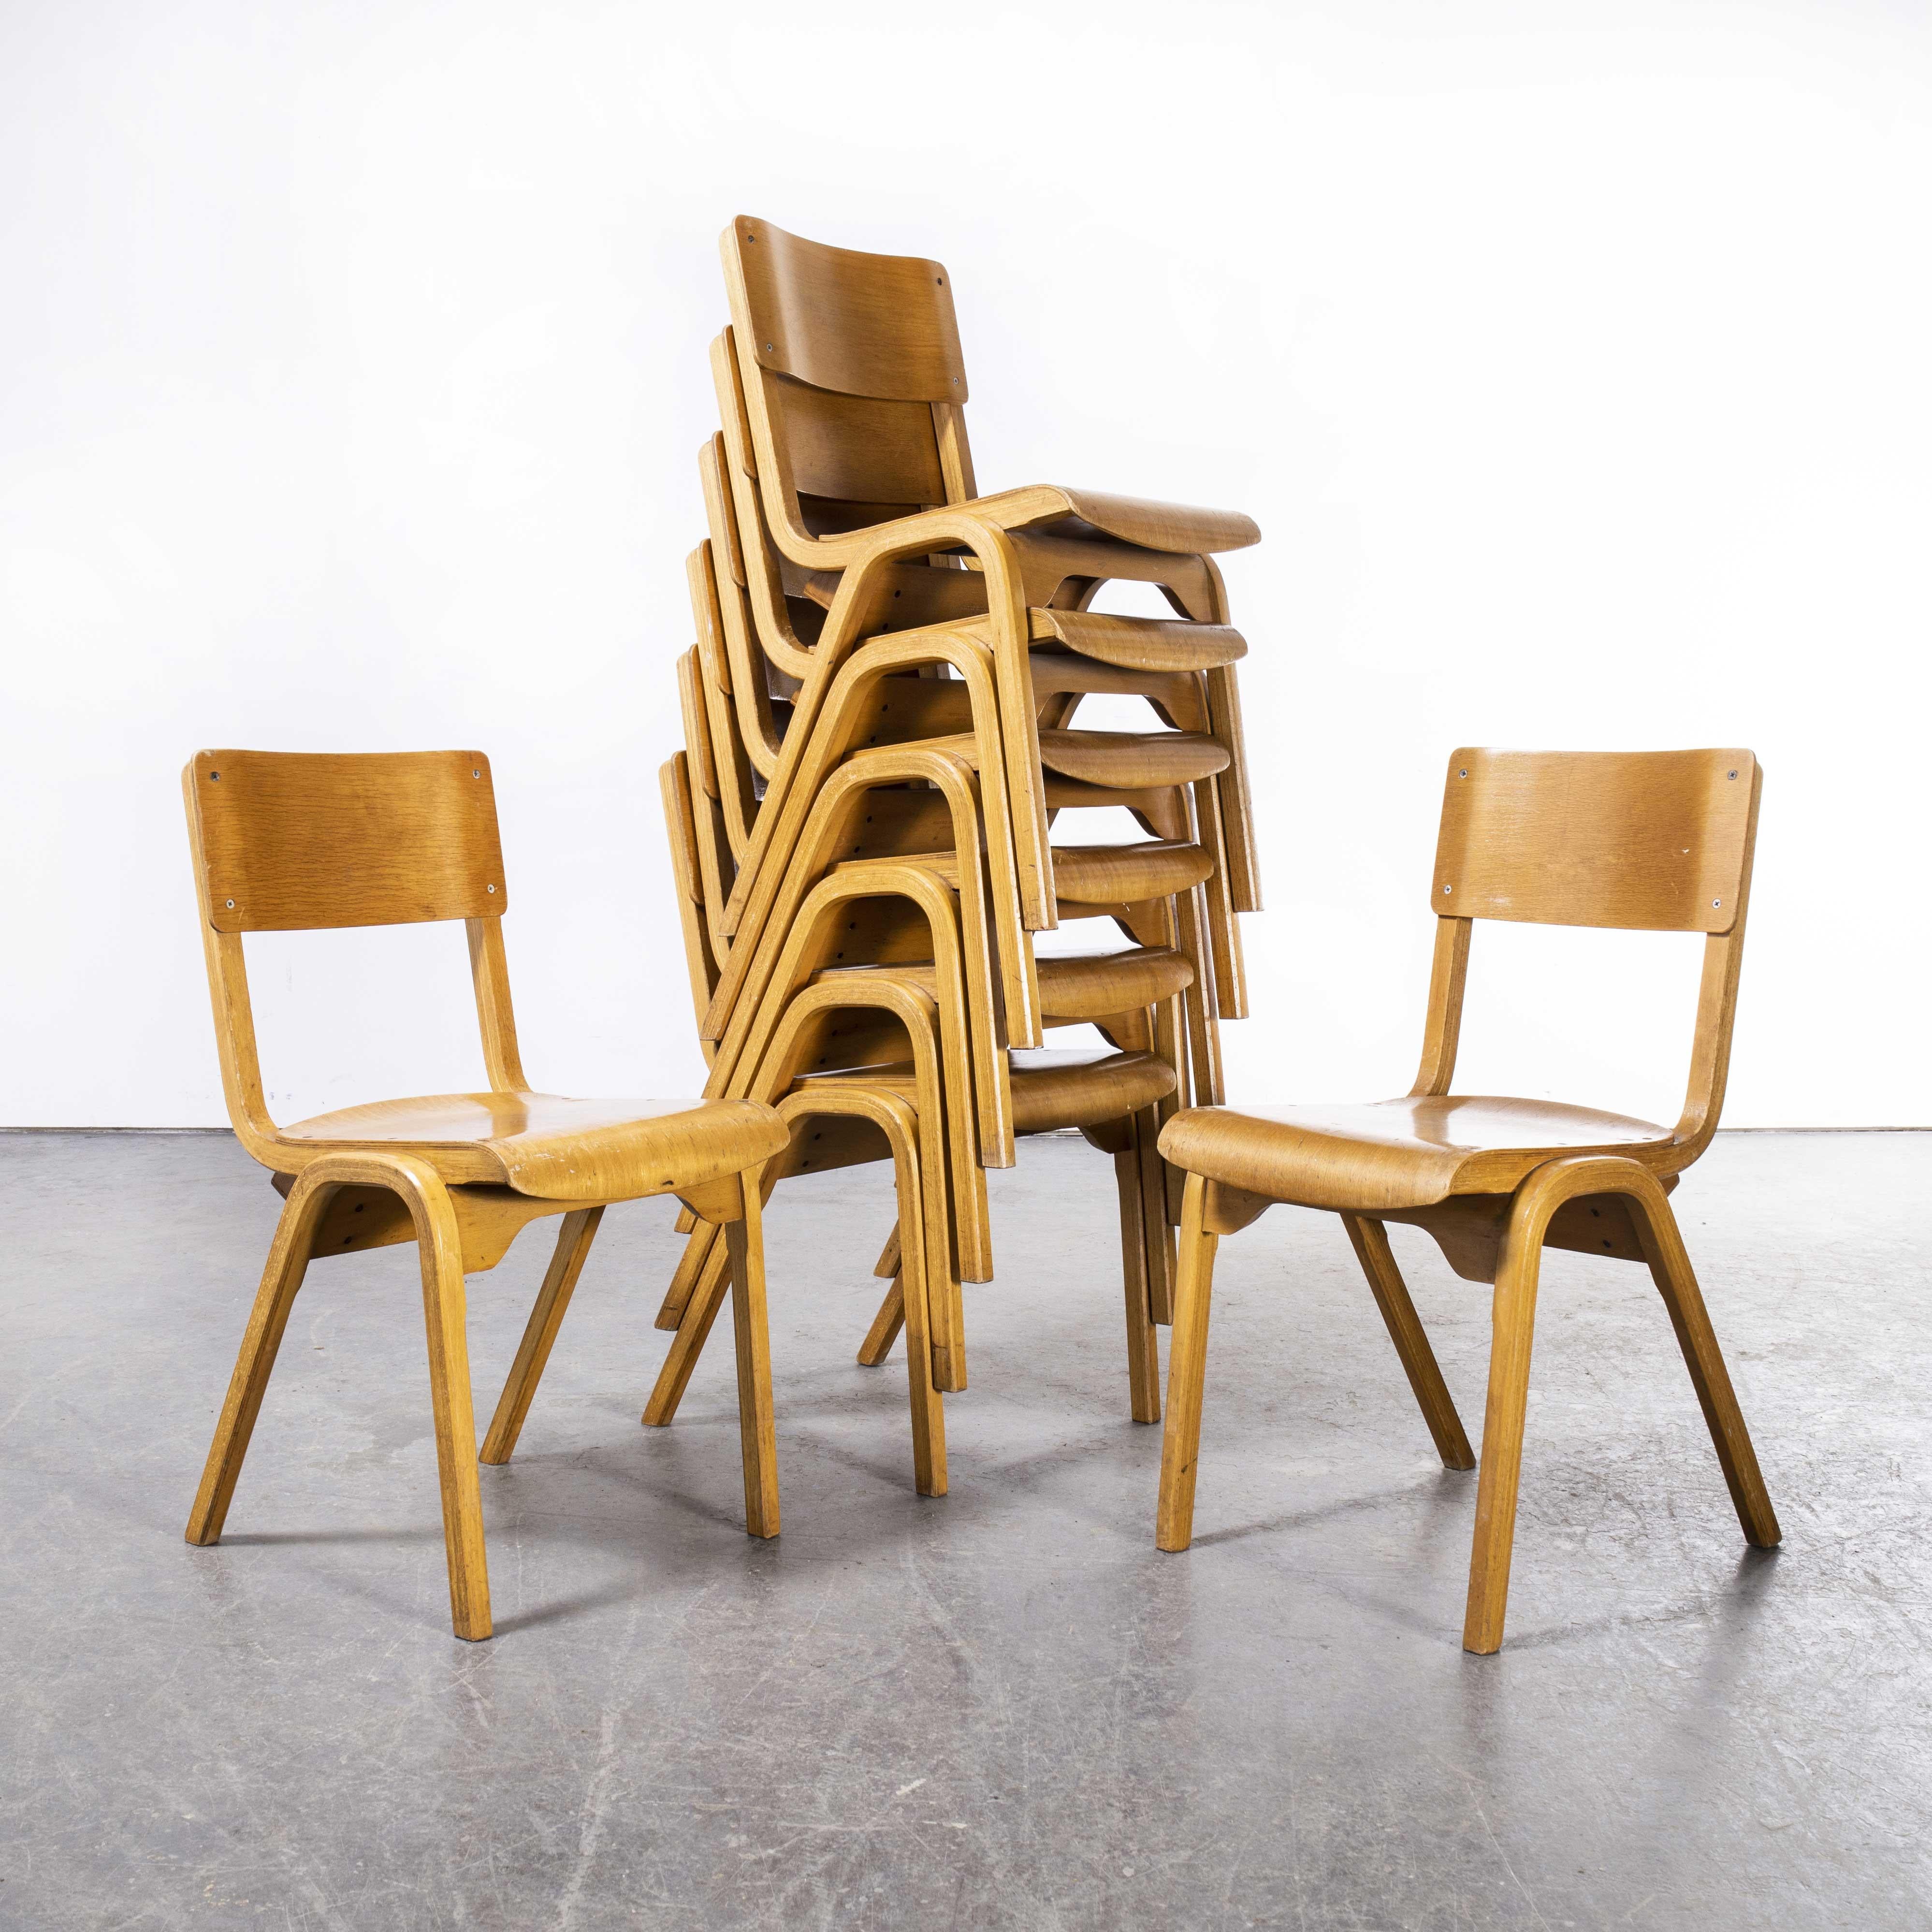 1950’s Lamstak dining chairs by James Leonard for Esa – set of eigh
1950’s Lamstak dining chairs by James Leonard for Esa – set of eigh. This is one of our favourite models of chairs. Designed by James Leonard for the ESA company it was an iconic